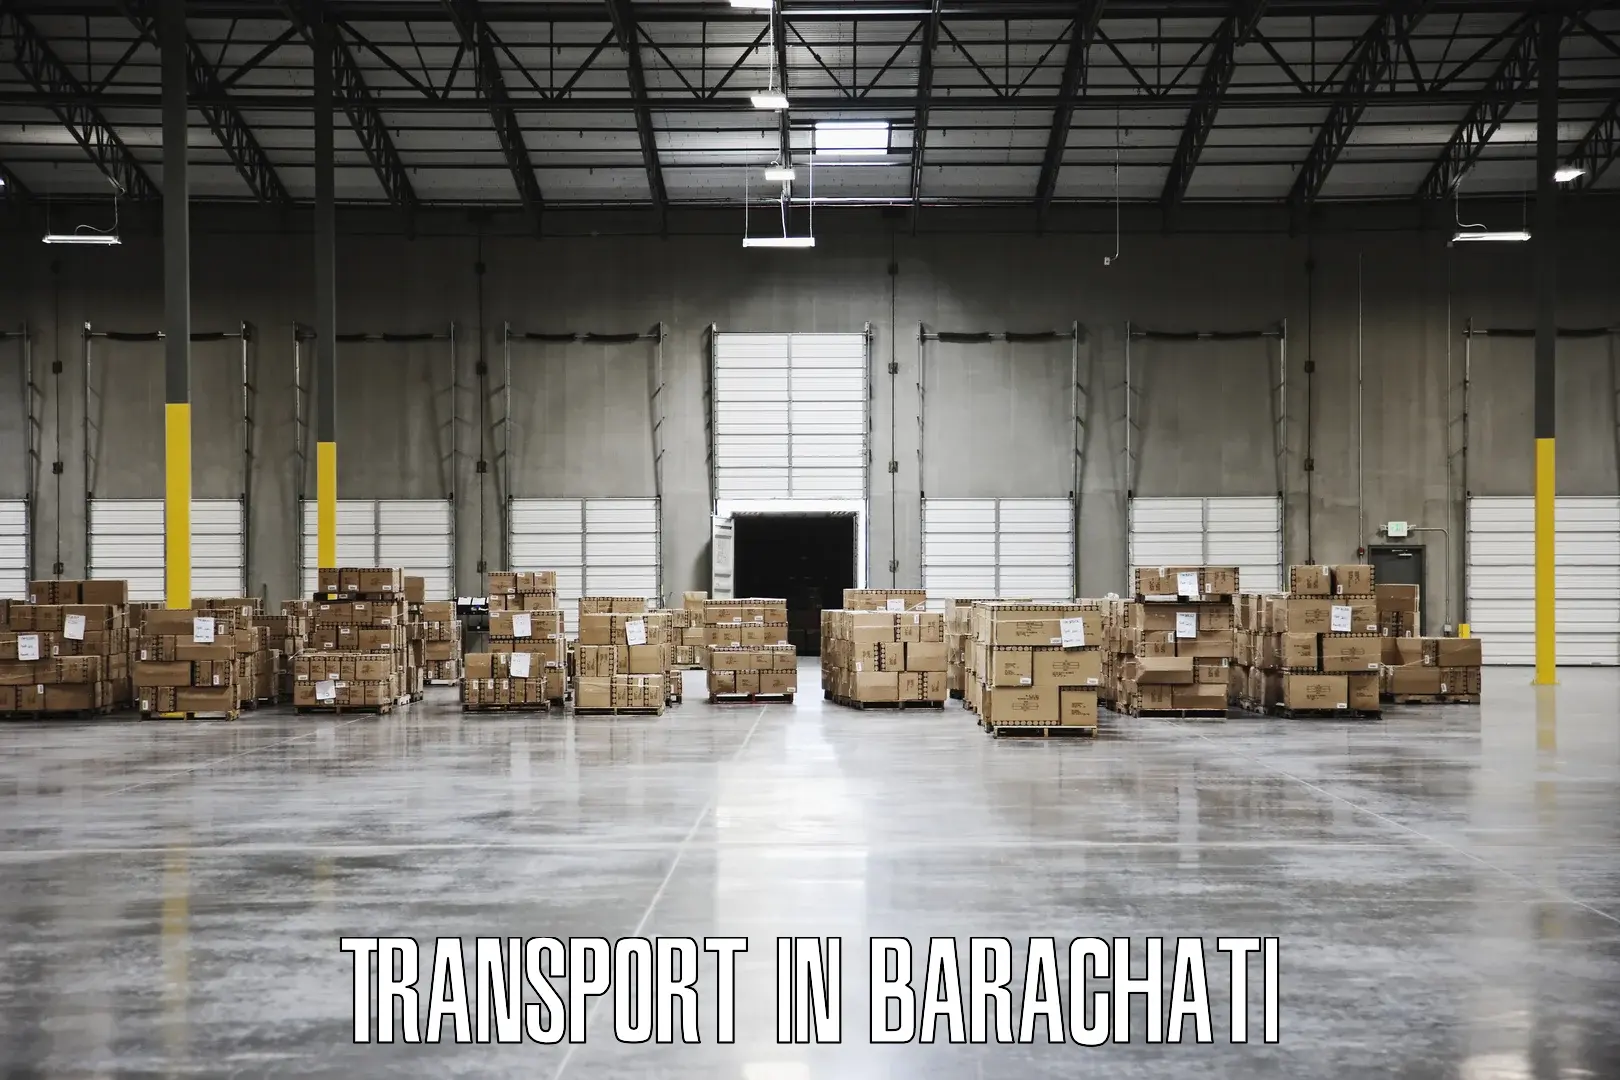 Daily parcel service transport in Barachati